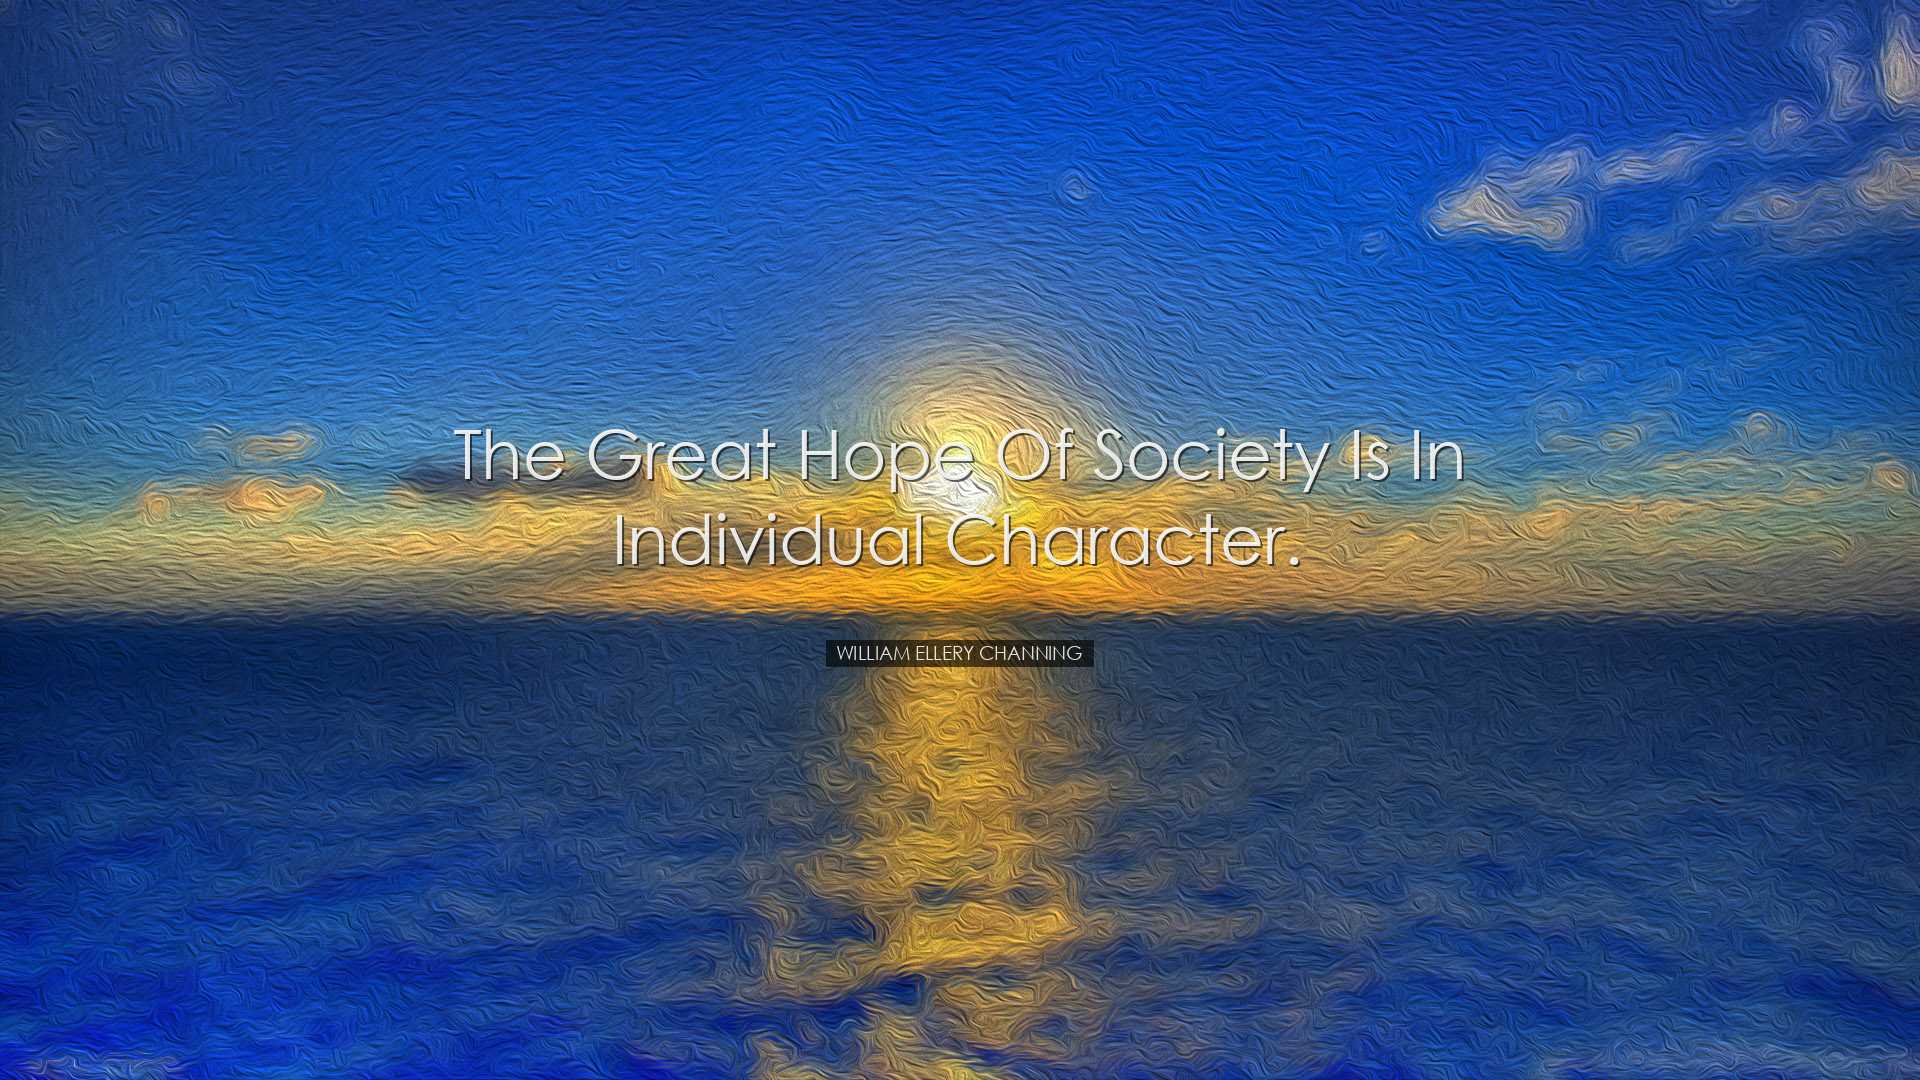 The great hope of society is in individual character. - William El